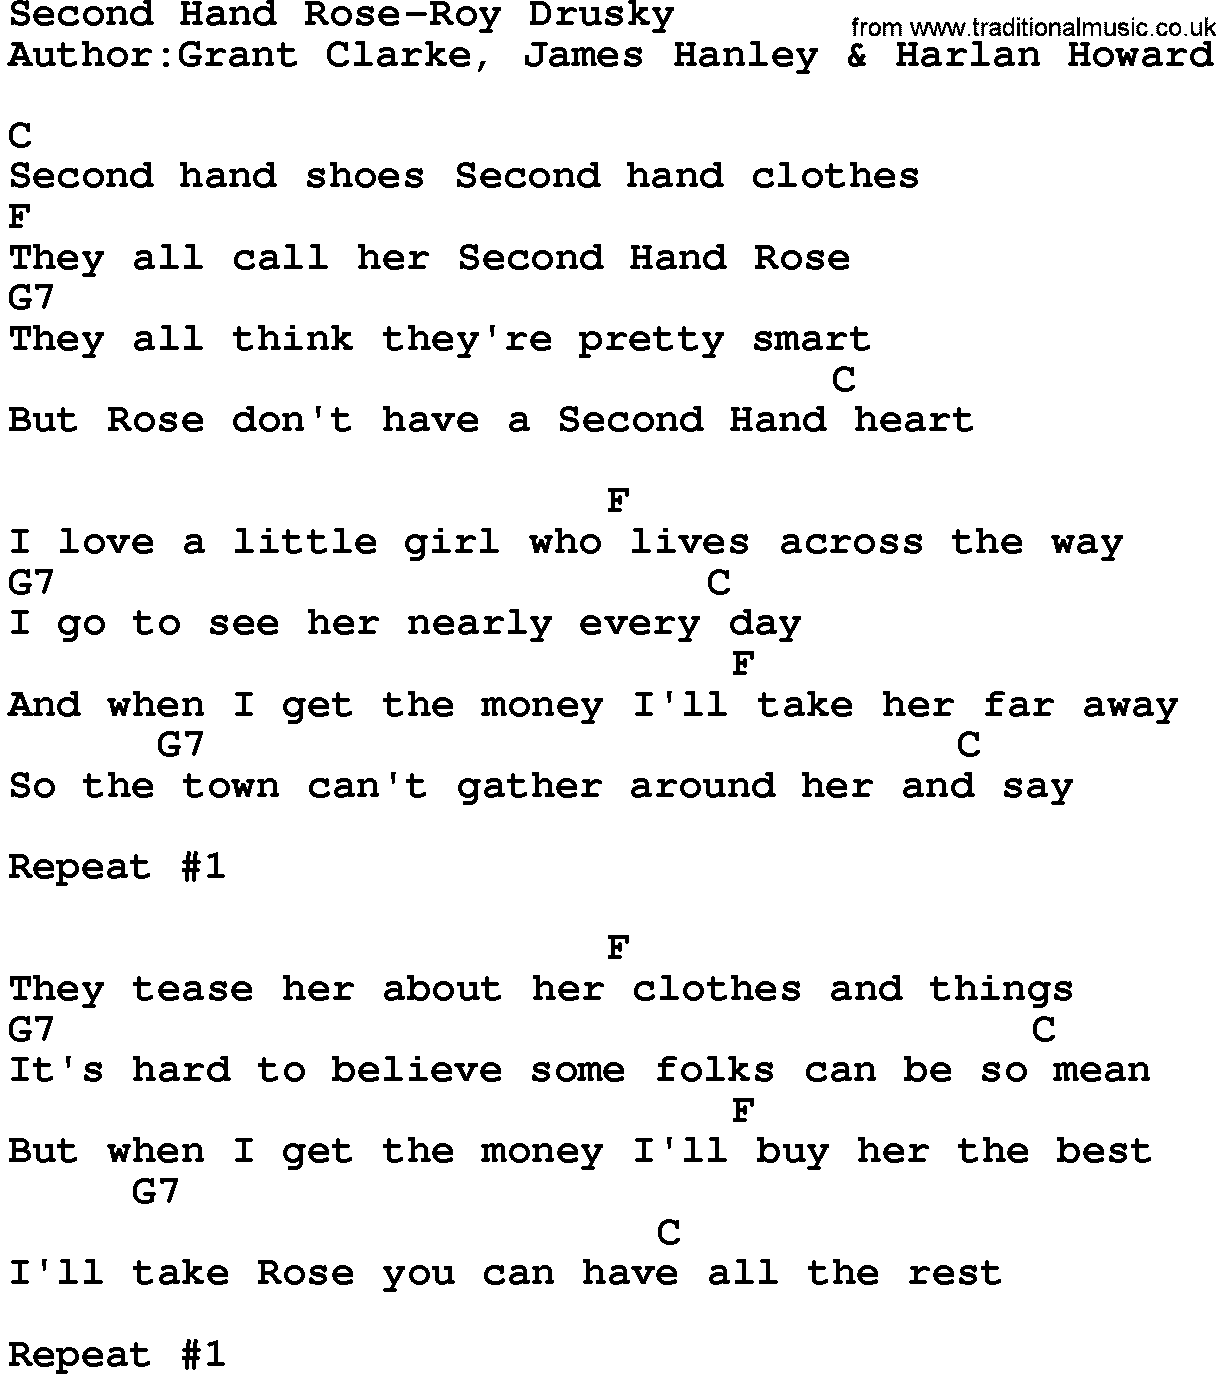 Country music song: Second Hand Rose-Roy Drusky lyrics and chords